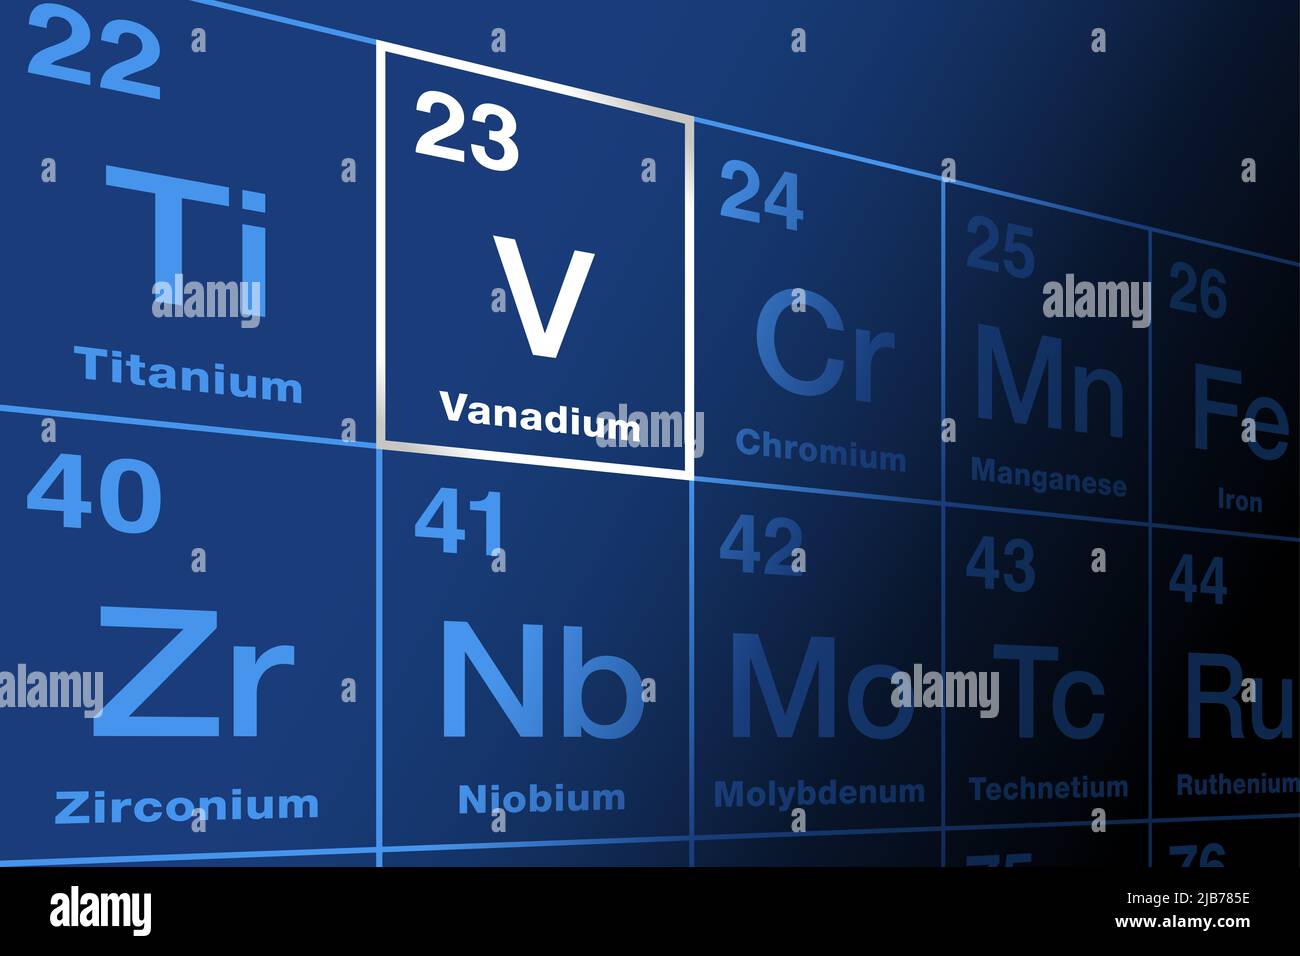 Vanadium on periodic table of the elements. Malleable transition metal and chemical element, with symbol V, and atomic number 23. Stock Photo